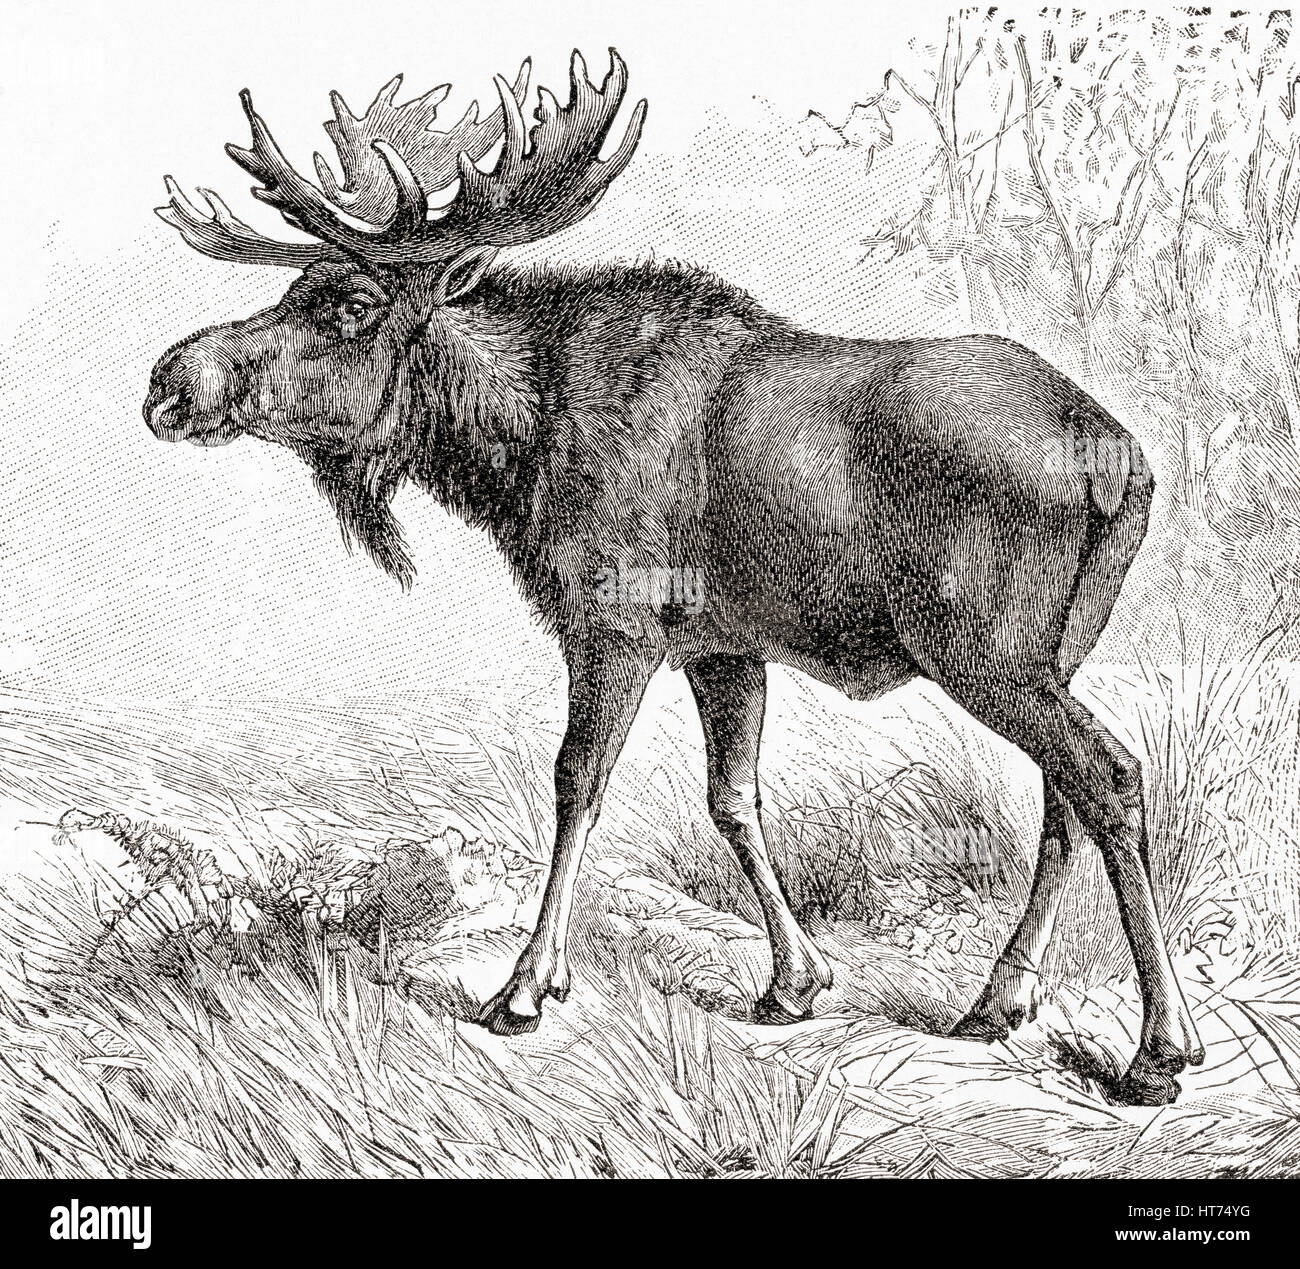 The moose or elk (Alces alces) the largest extant species in the deer family.  From Meyers Lexicon, published 1927. Stock Photo